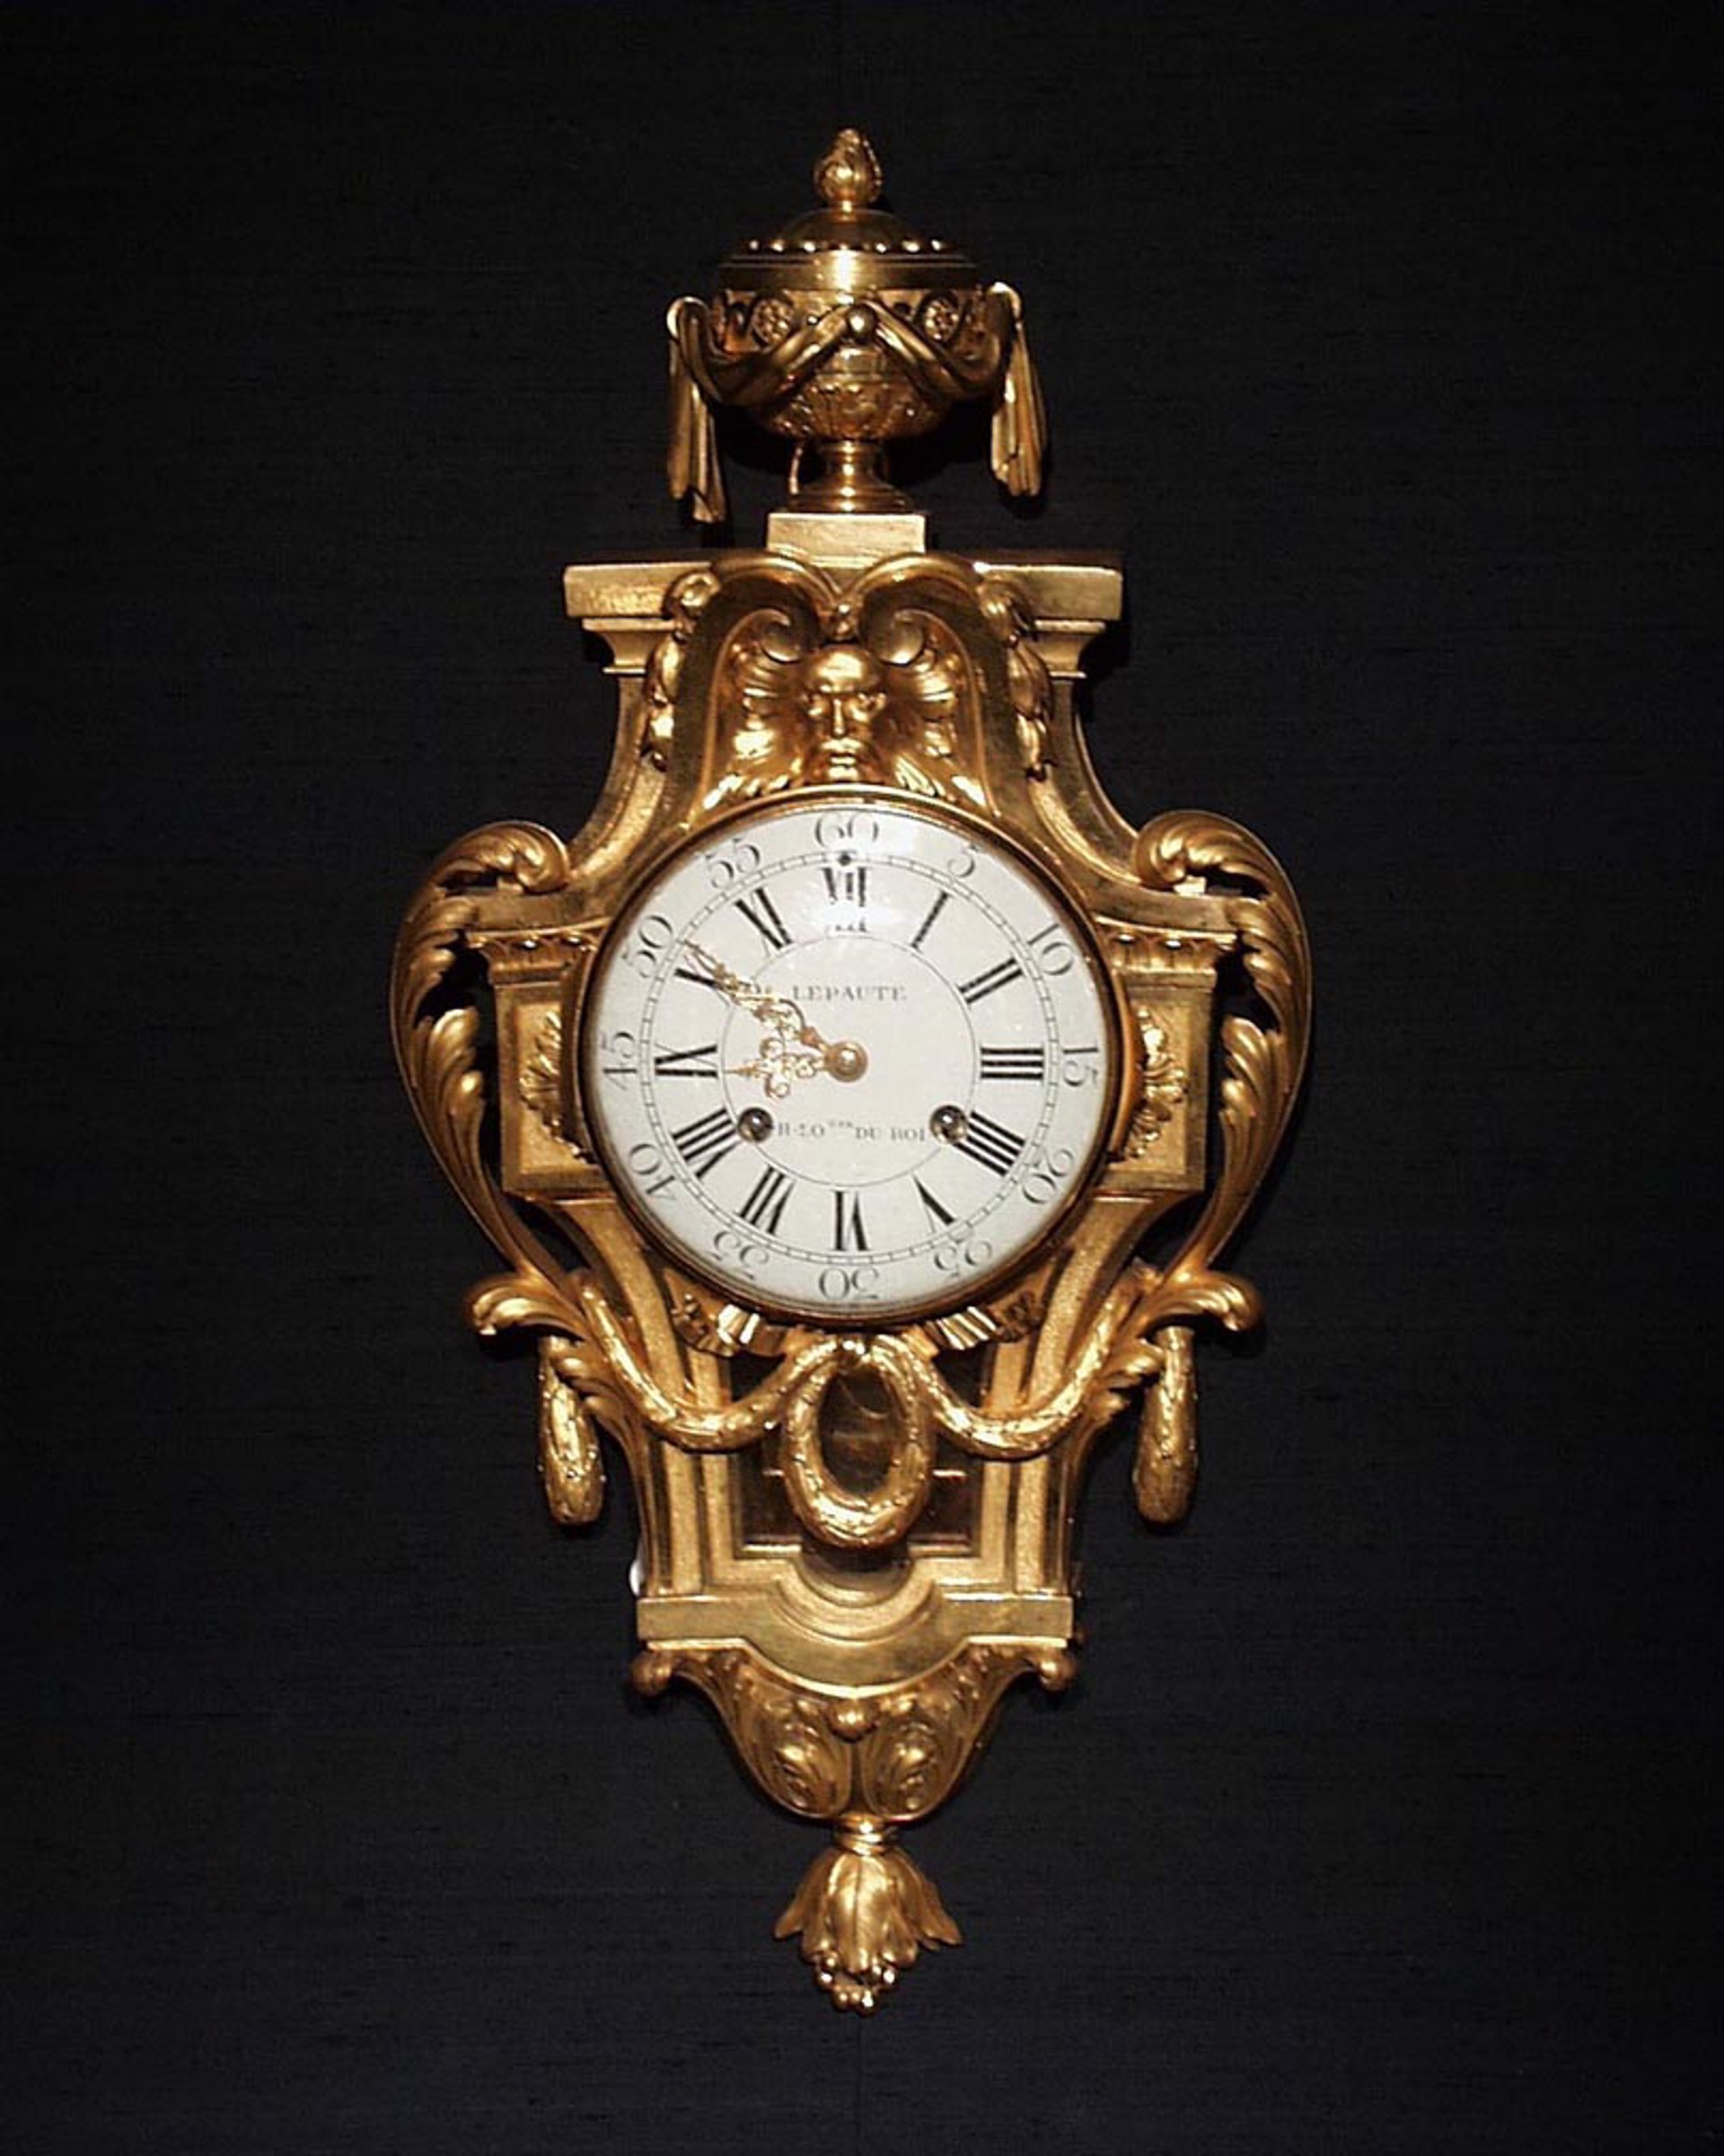 LOUIS XVI BRONZE CARTEL CLOCK WITH MASK AND GARLANDS BY LEPAUTE by Jean-Andre Lepaute